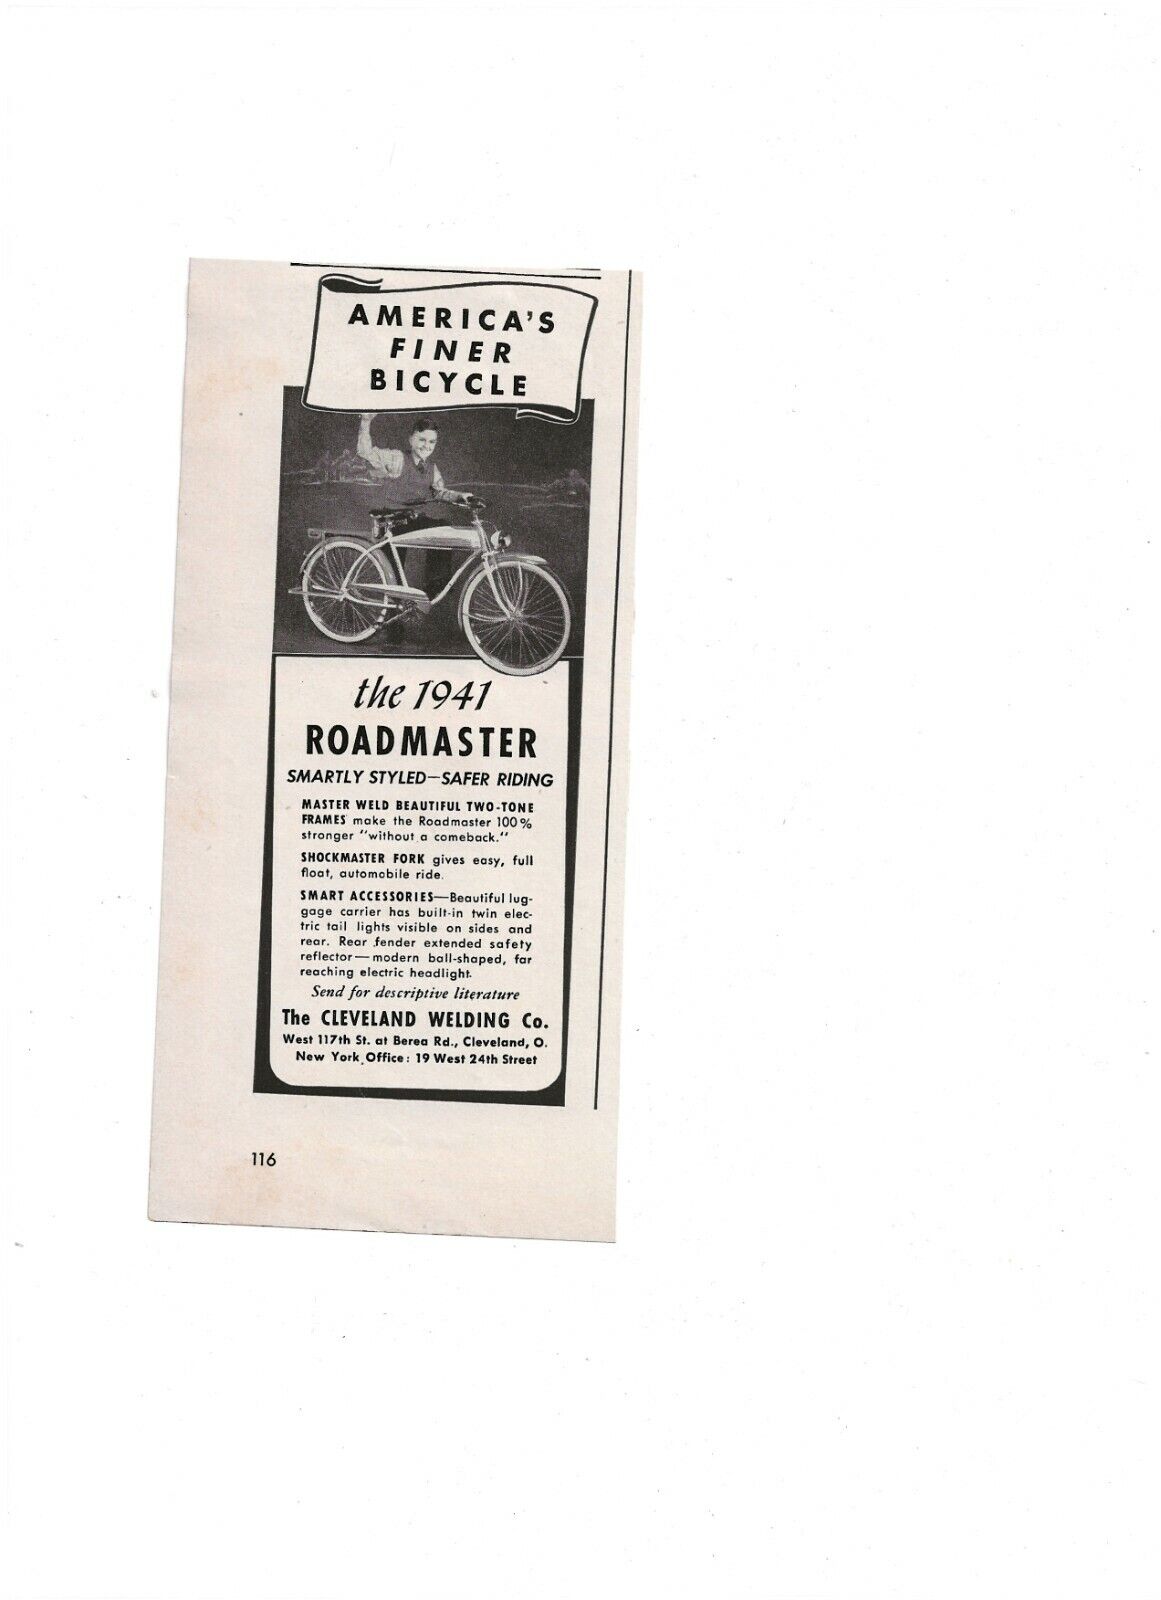 1941 CLEVELAND WELDING CO VNTG Print Ad America\'s Finer Bicycle 1941 ROADMASTER